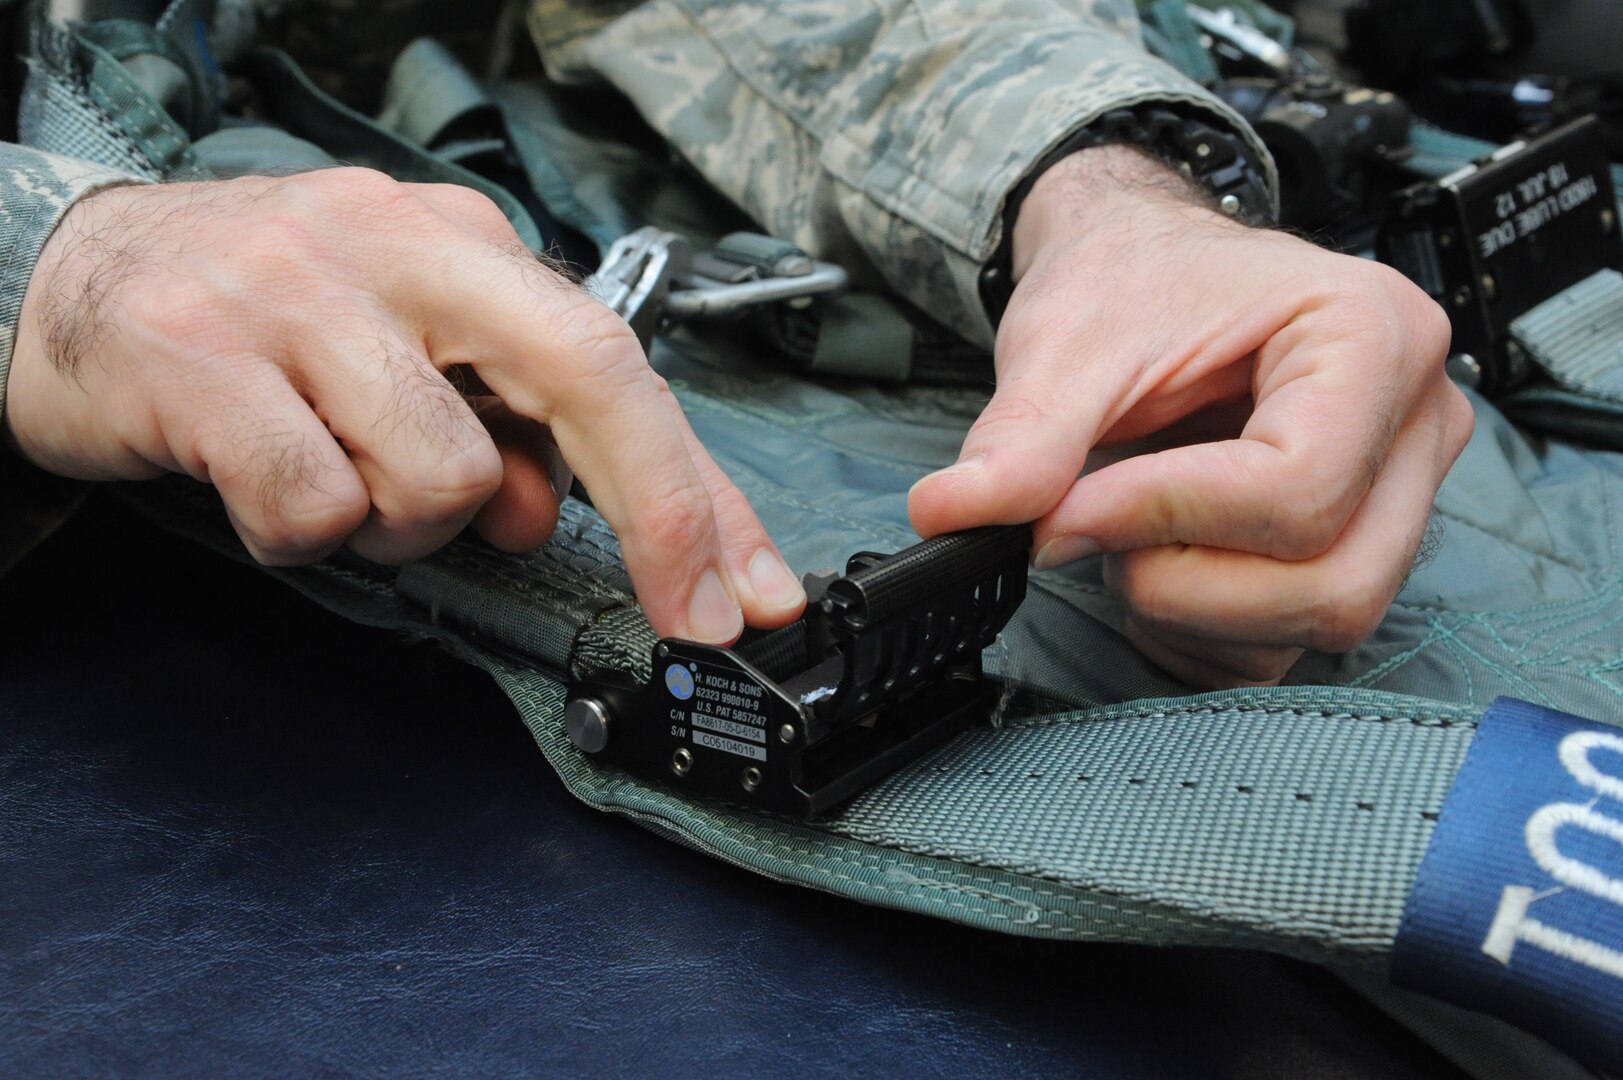 An aircrew flight equipment technician inspects and repairs harnesses used by 415th Flight Test Flight pilots May 17 on Joint Base San Antonio-Randolph, Taxas.  (U.S. Air Force photo by Rich McFadden) 